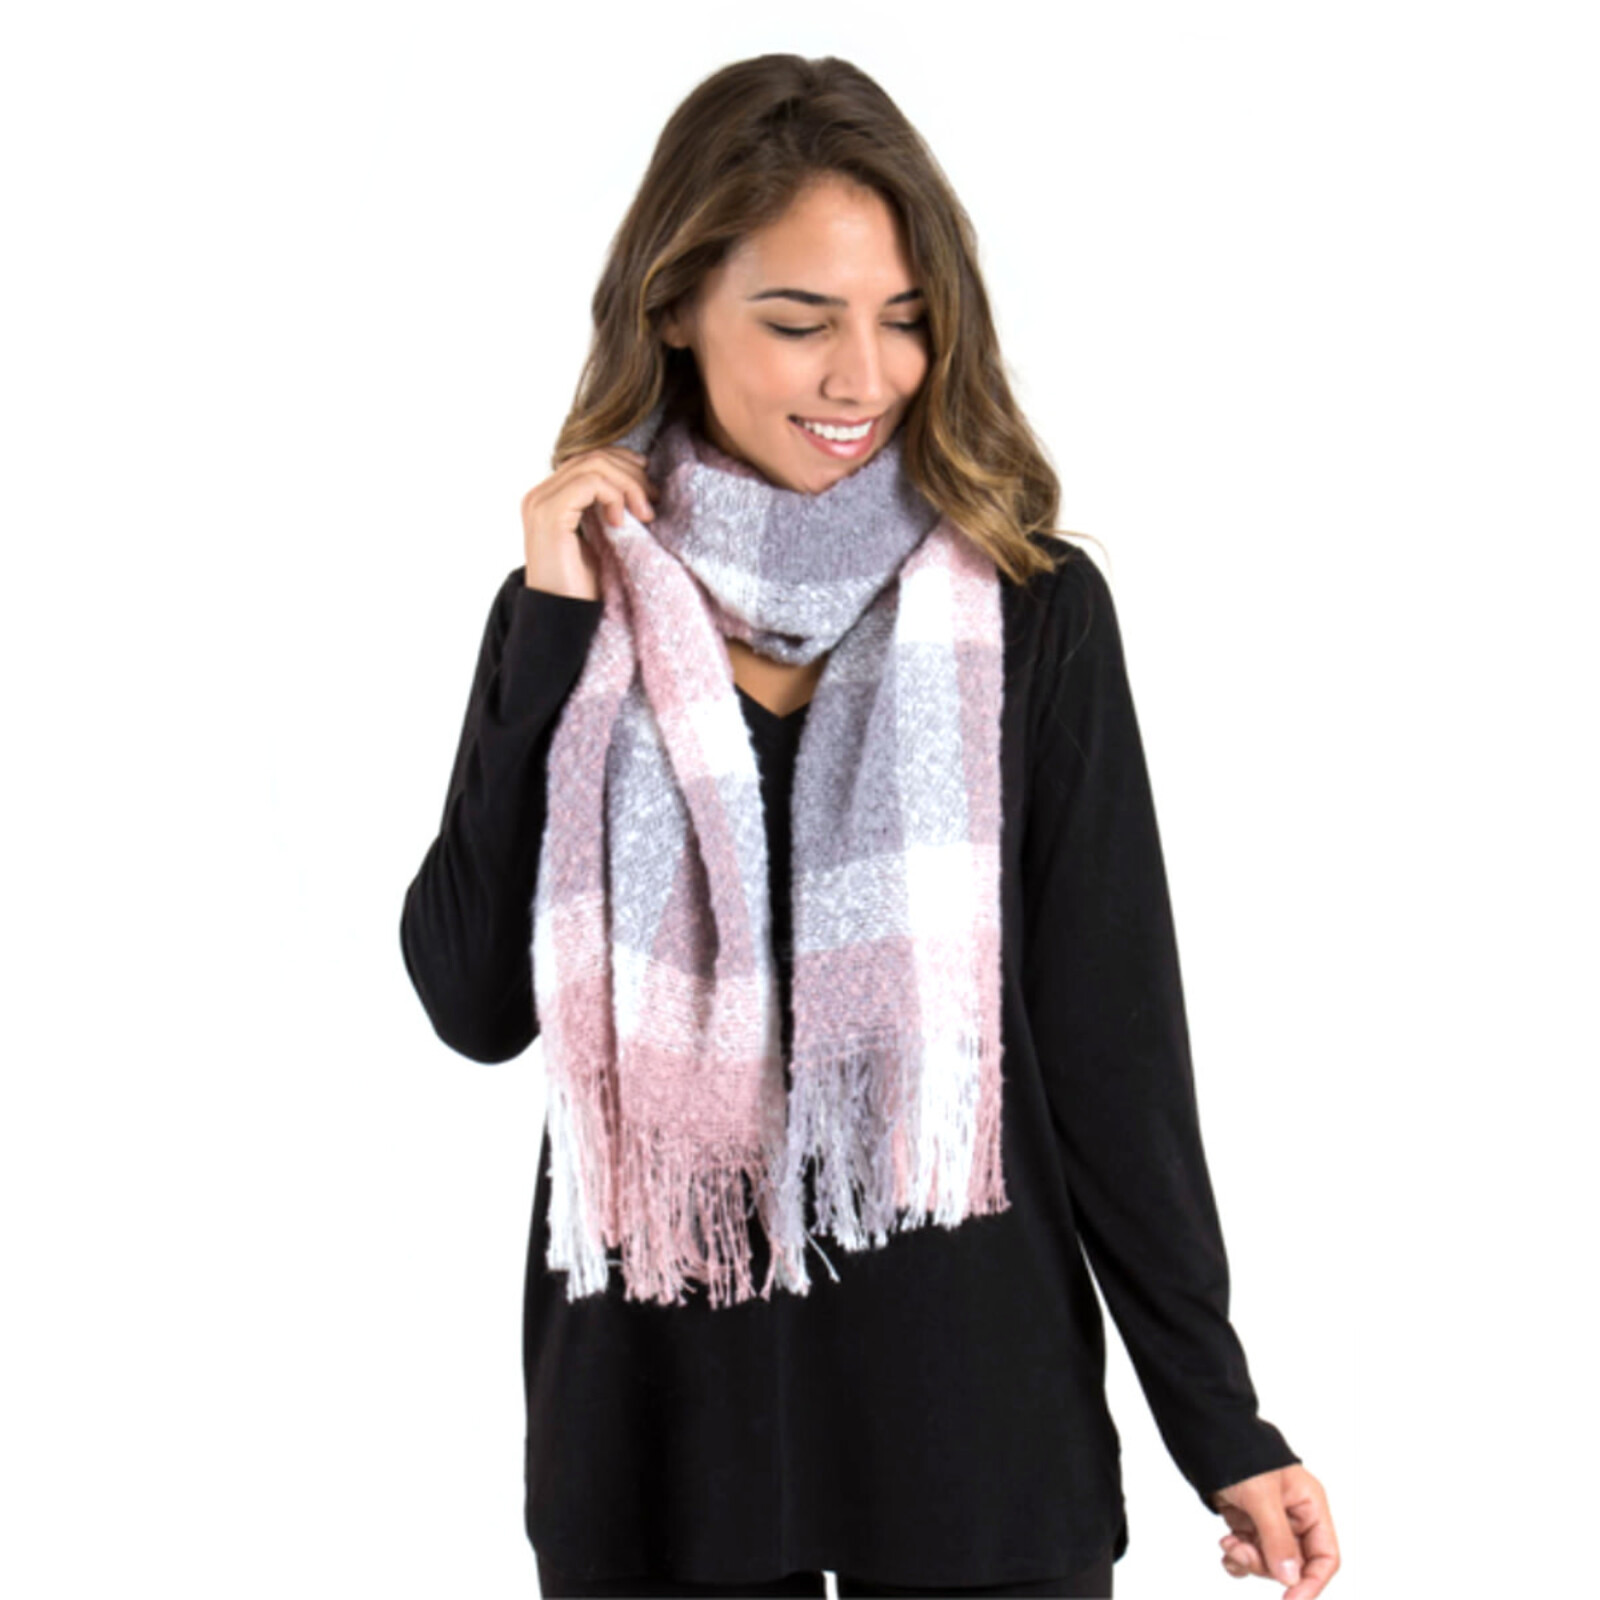 Simply Noelle Plaid Boxed Scarf/Wrap       SCV8010 loading=